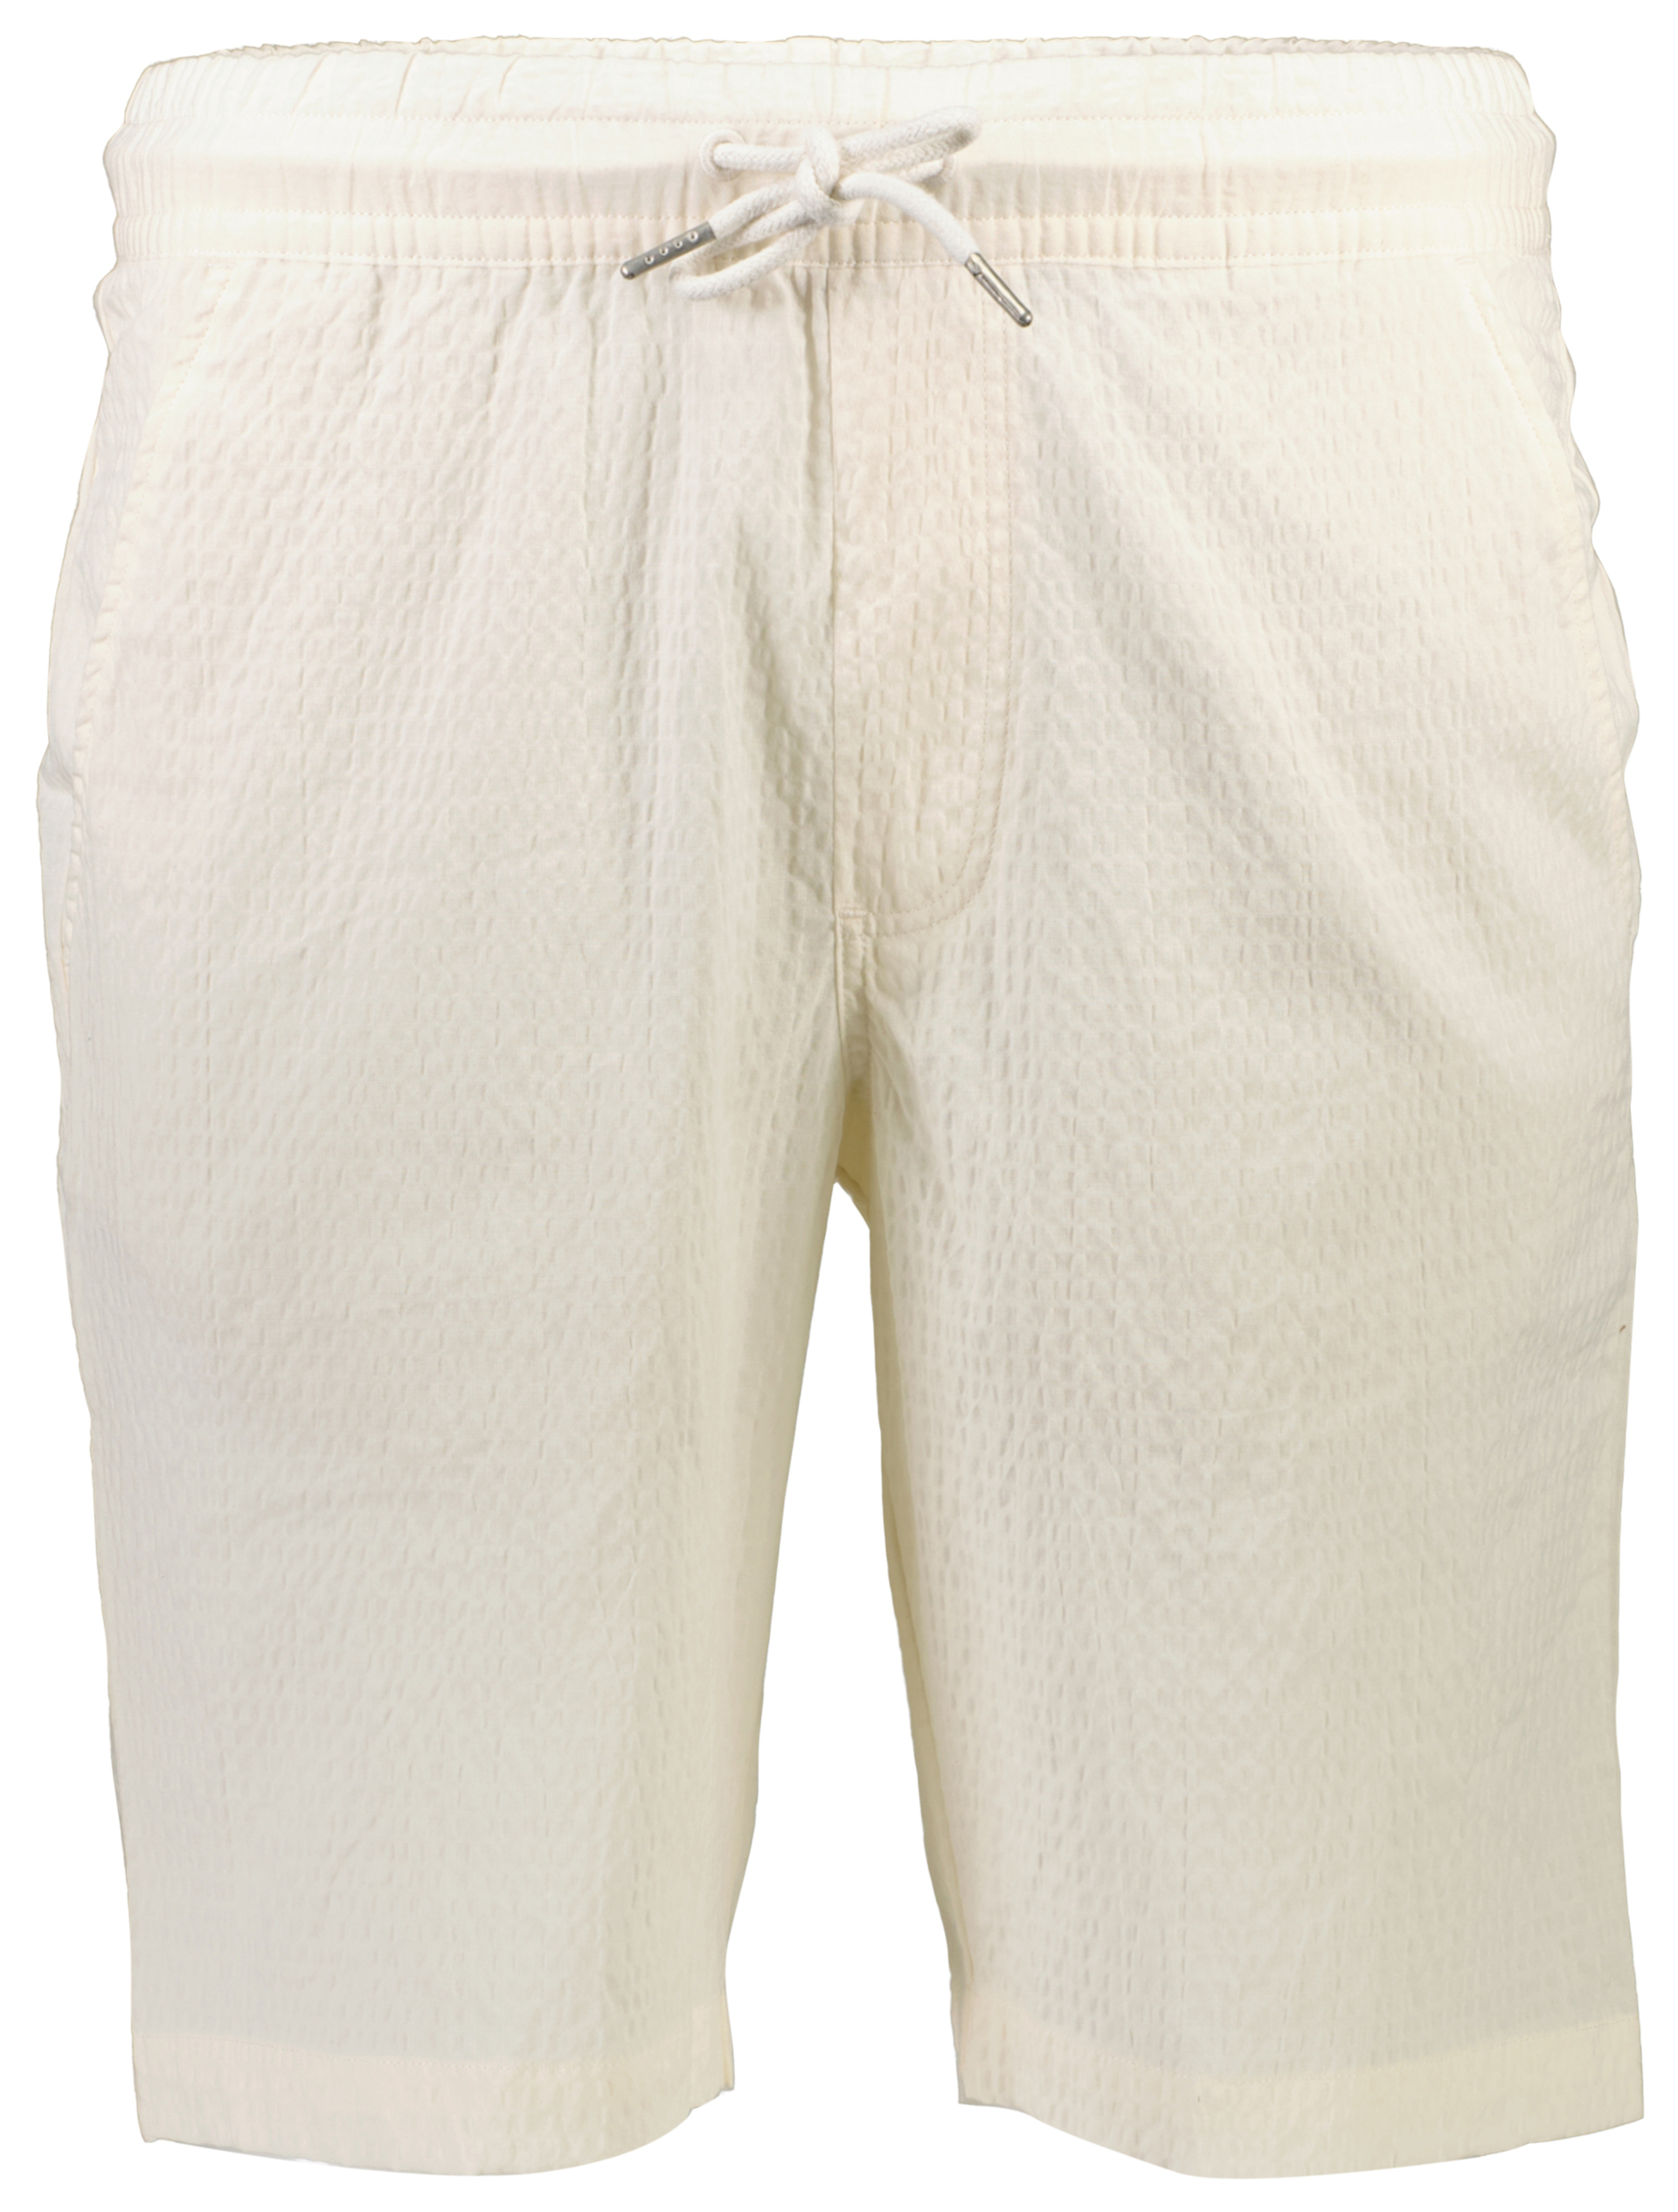 Lindbergh Casual shorts white / off white